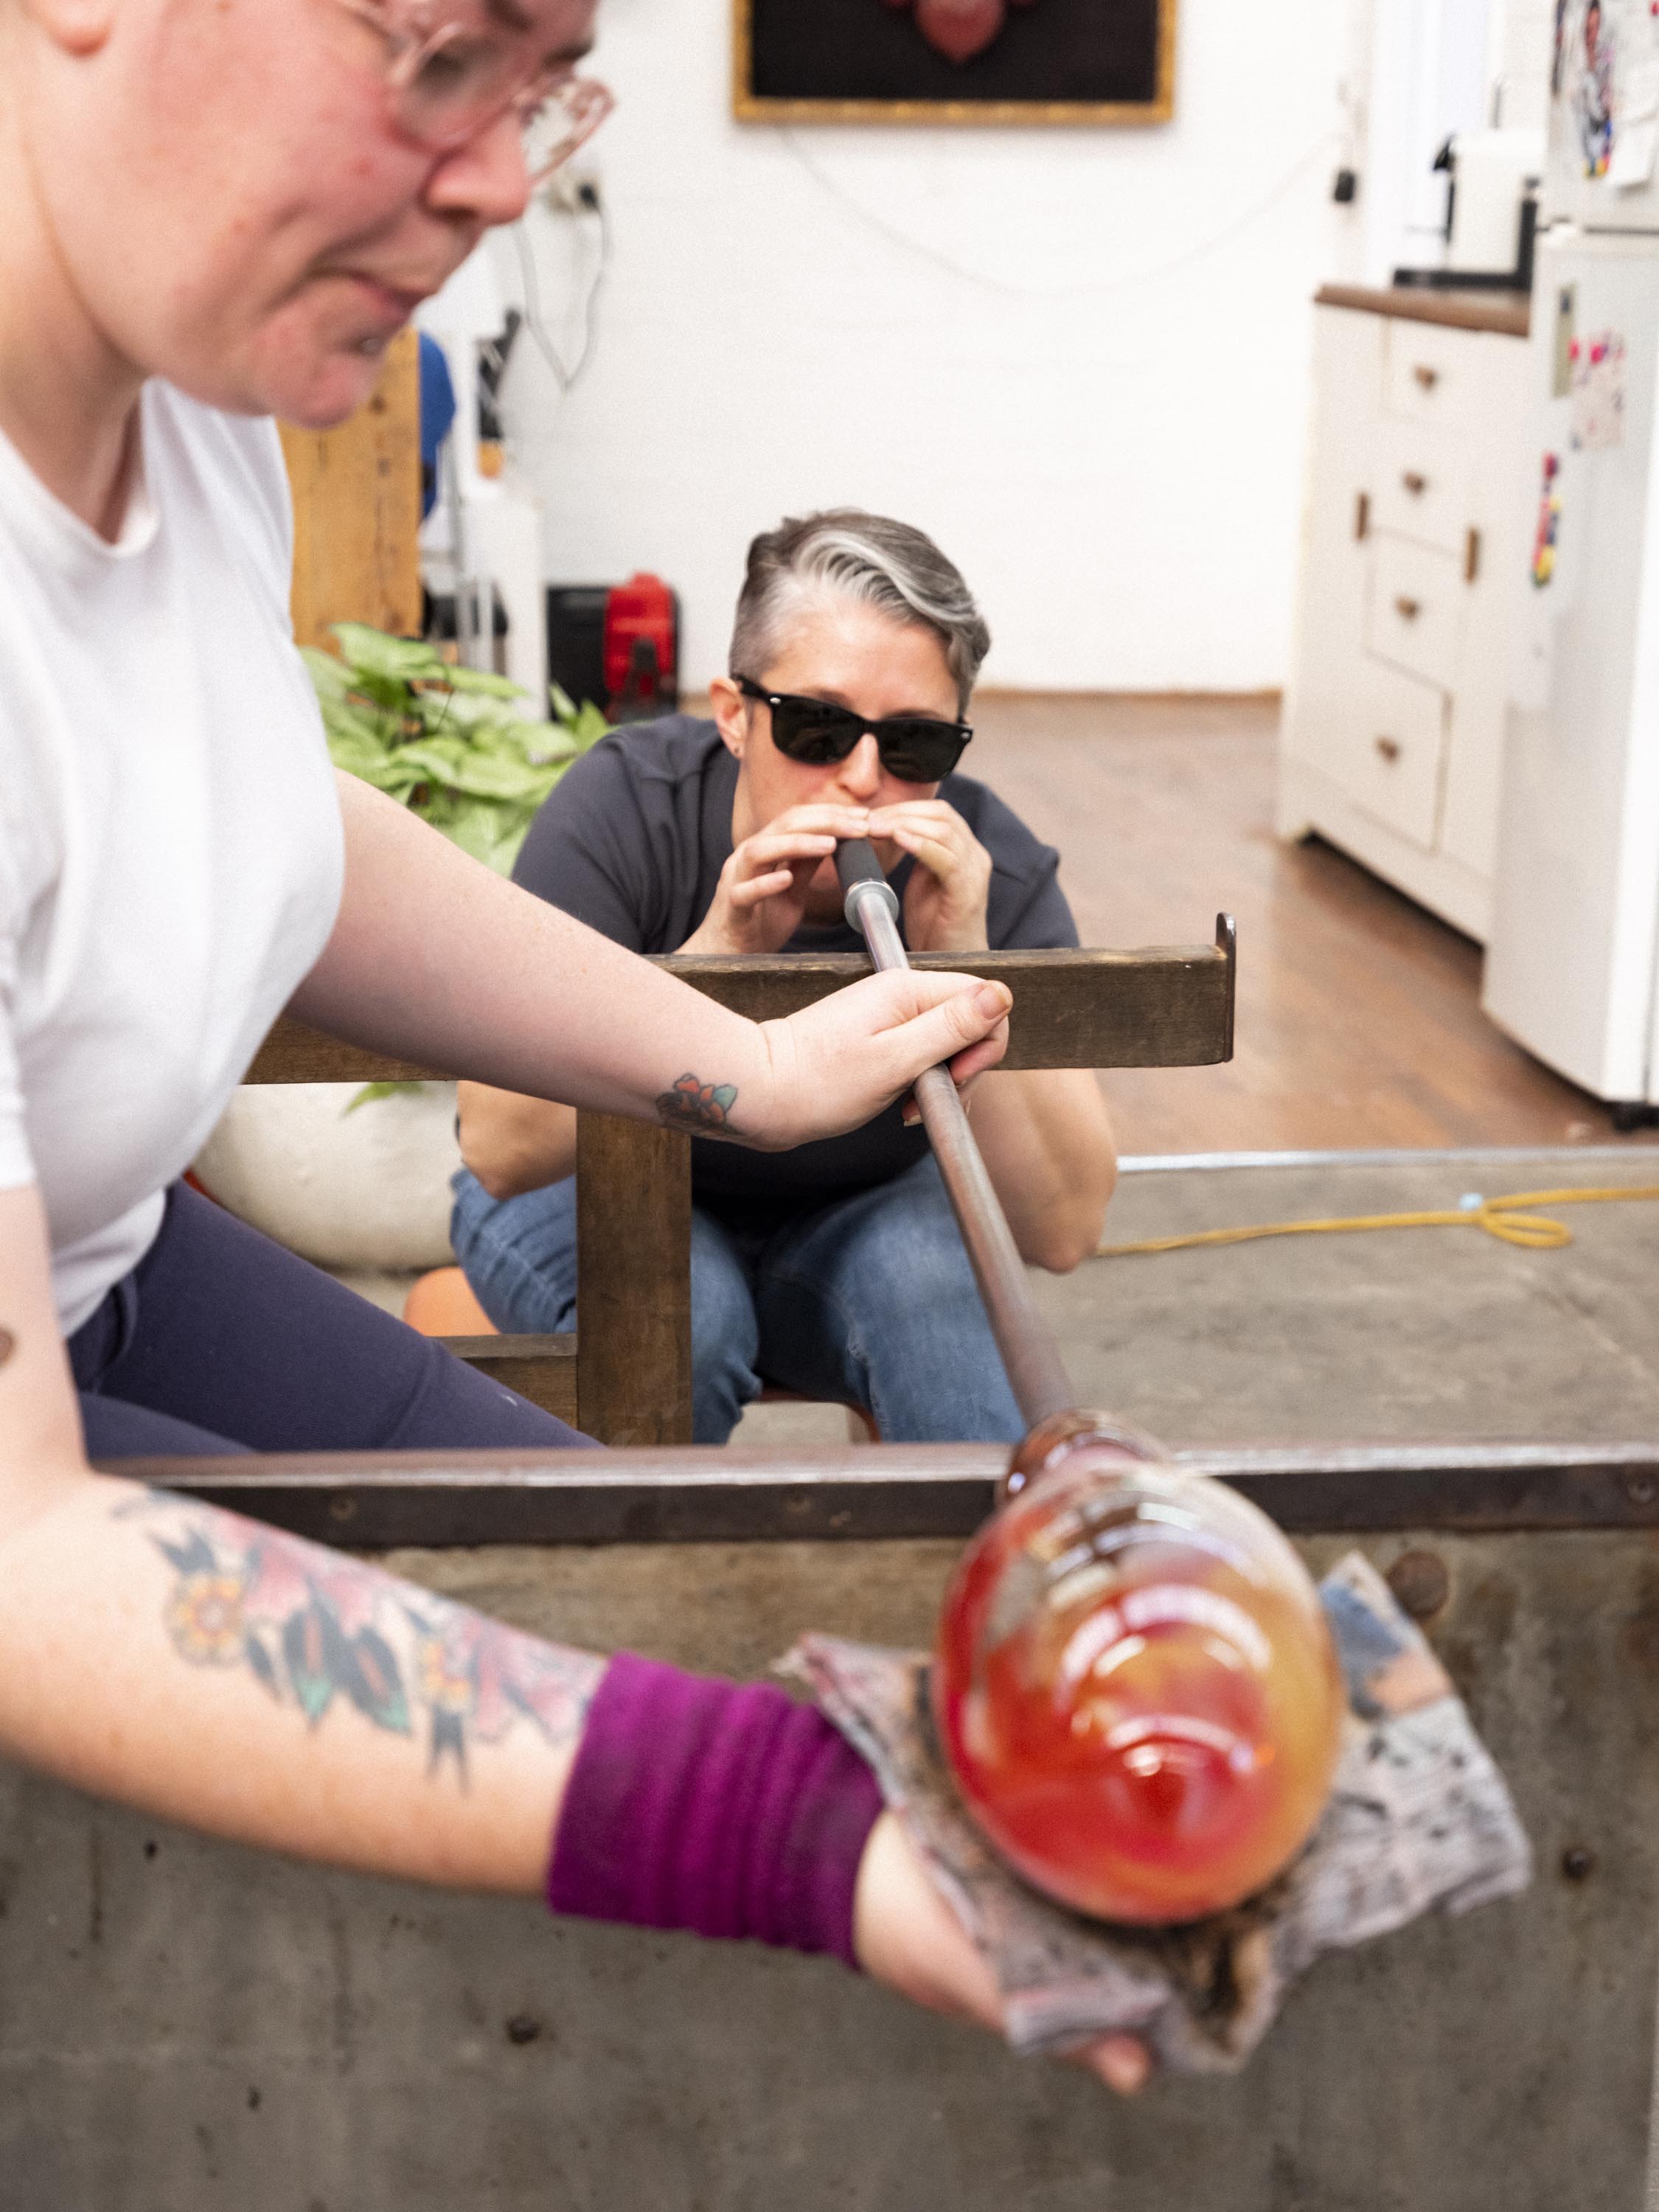 Blowing the glass into the final vase shape